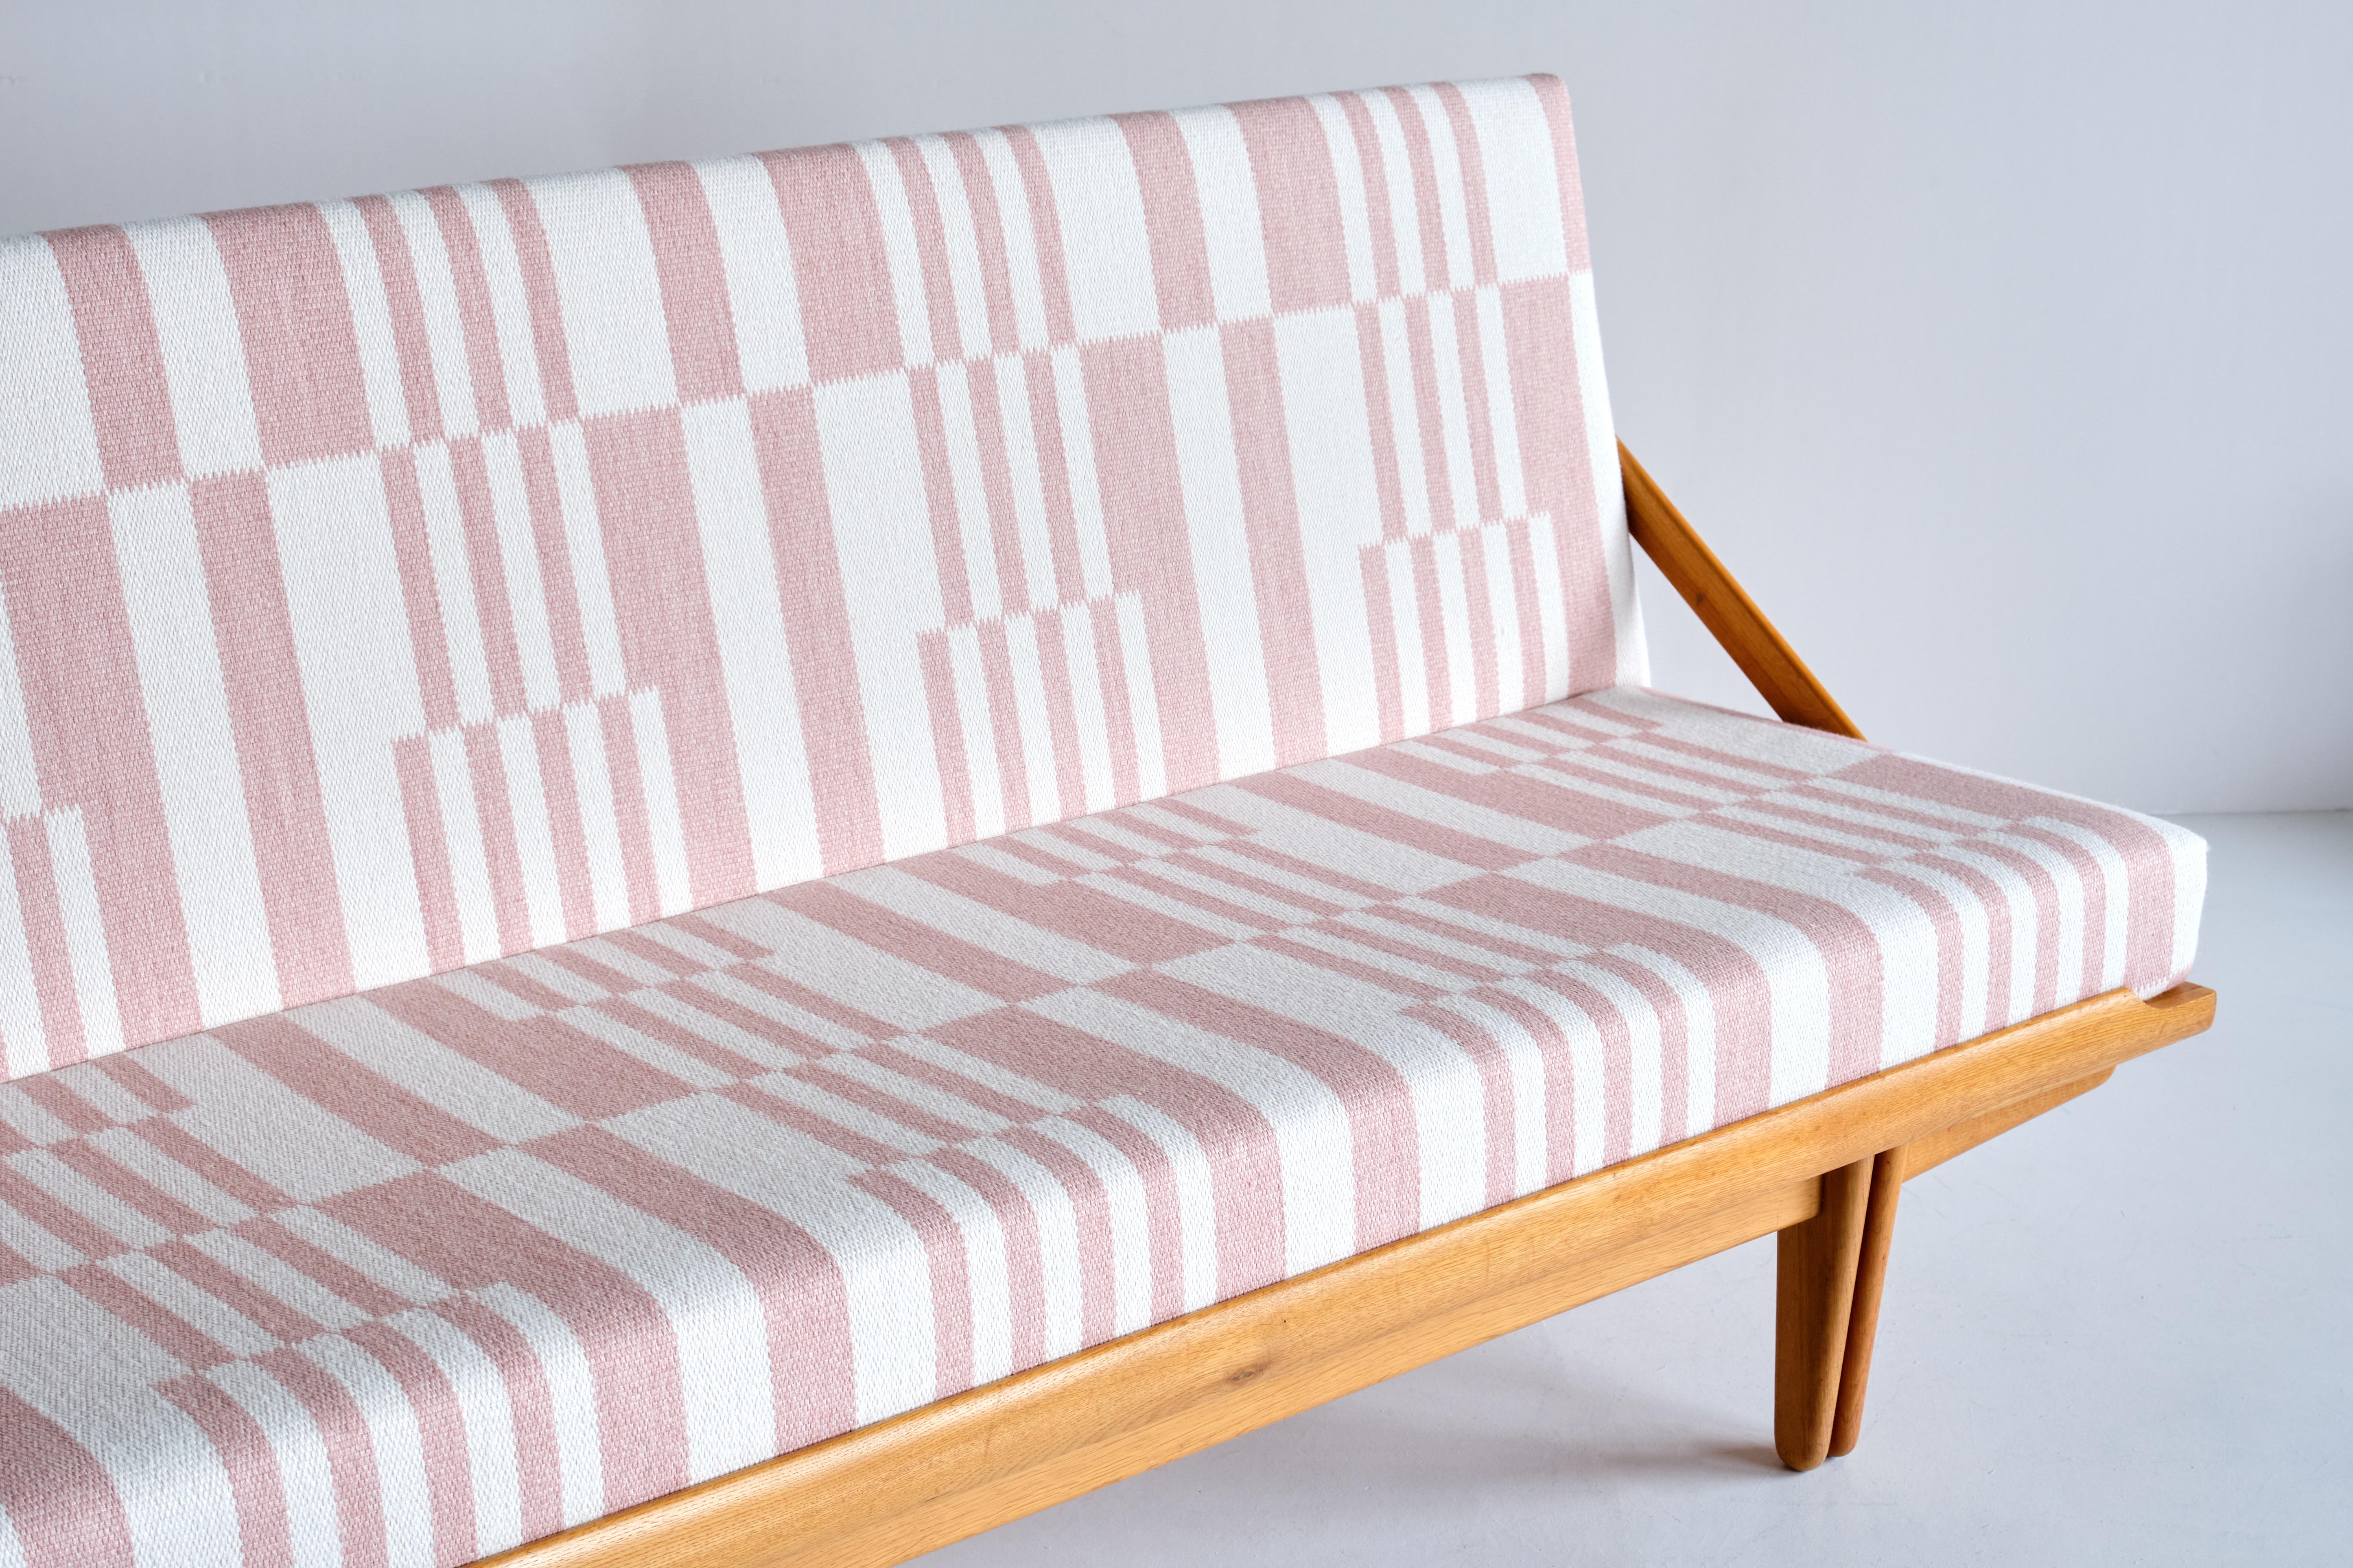 Swedish Poul Volther Sofa / Daybed in Oak and Pierre Frey Fabric, Gemla, Sweden, 1955 For Sale